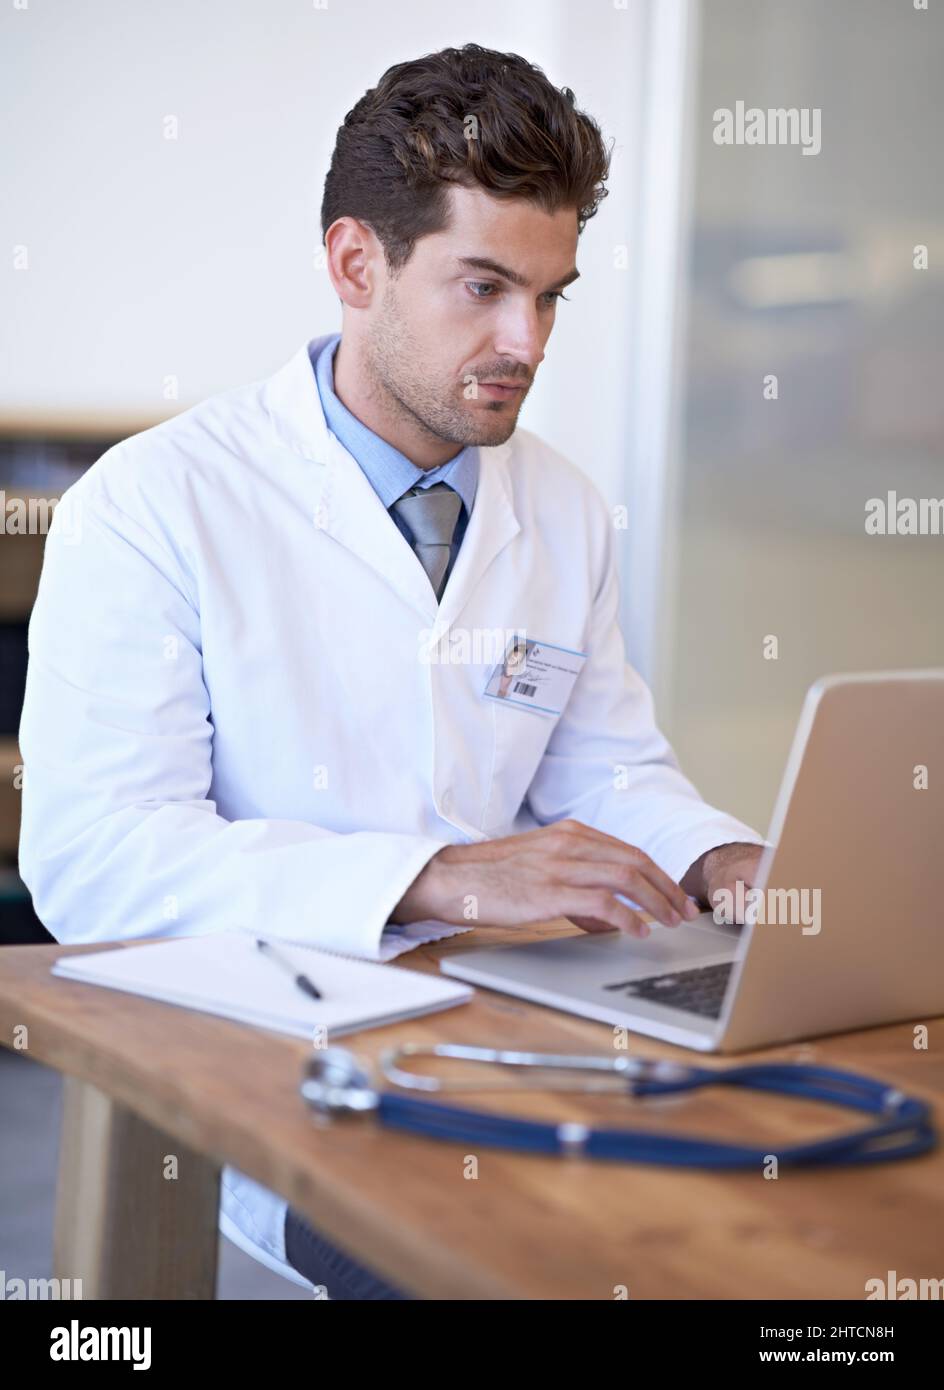 Well informed on every medical procedure. Shot of a young doctor at work on a laptop. Stock Photo